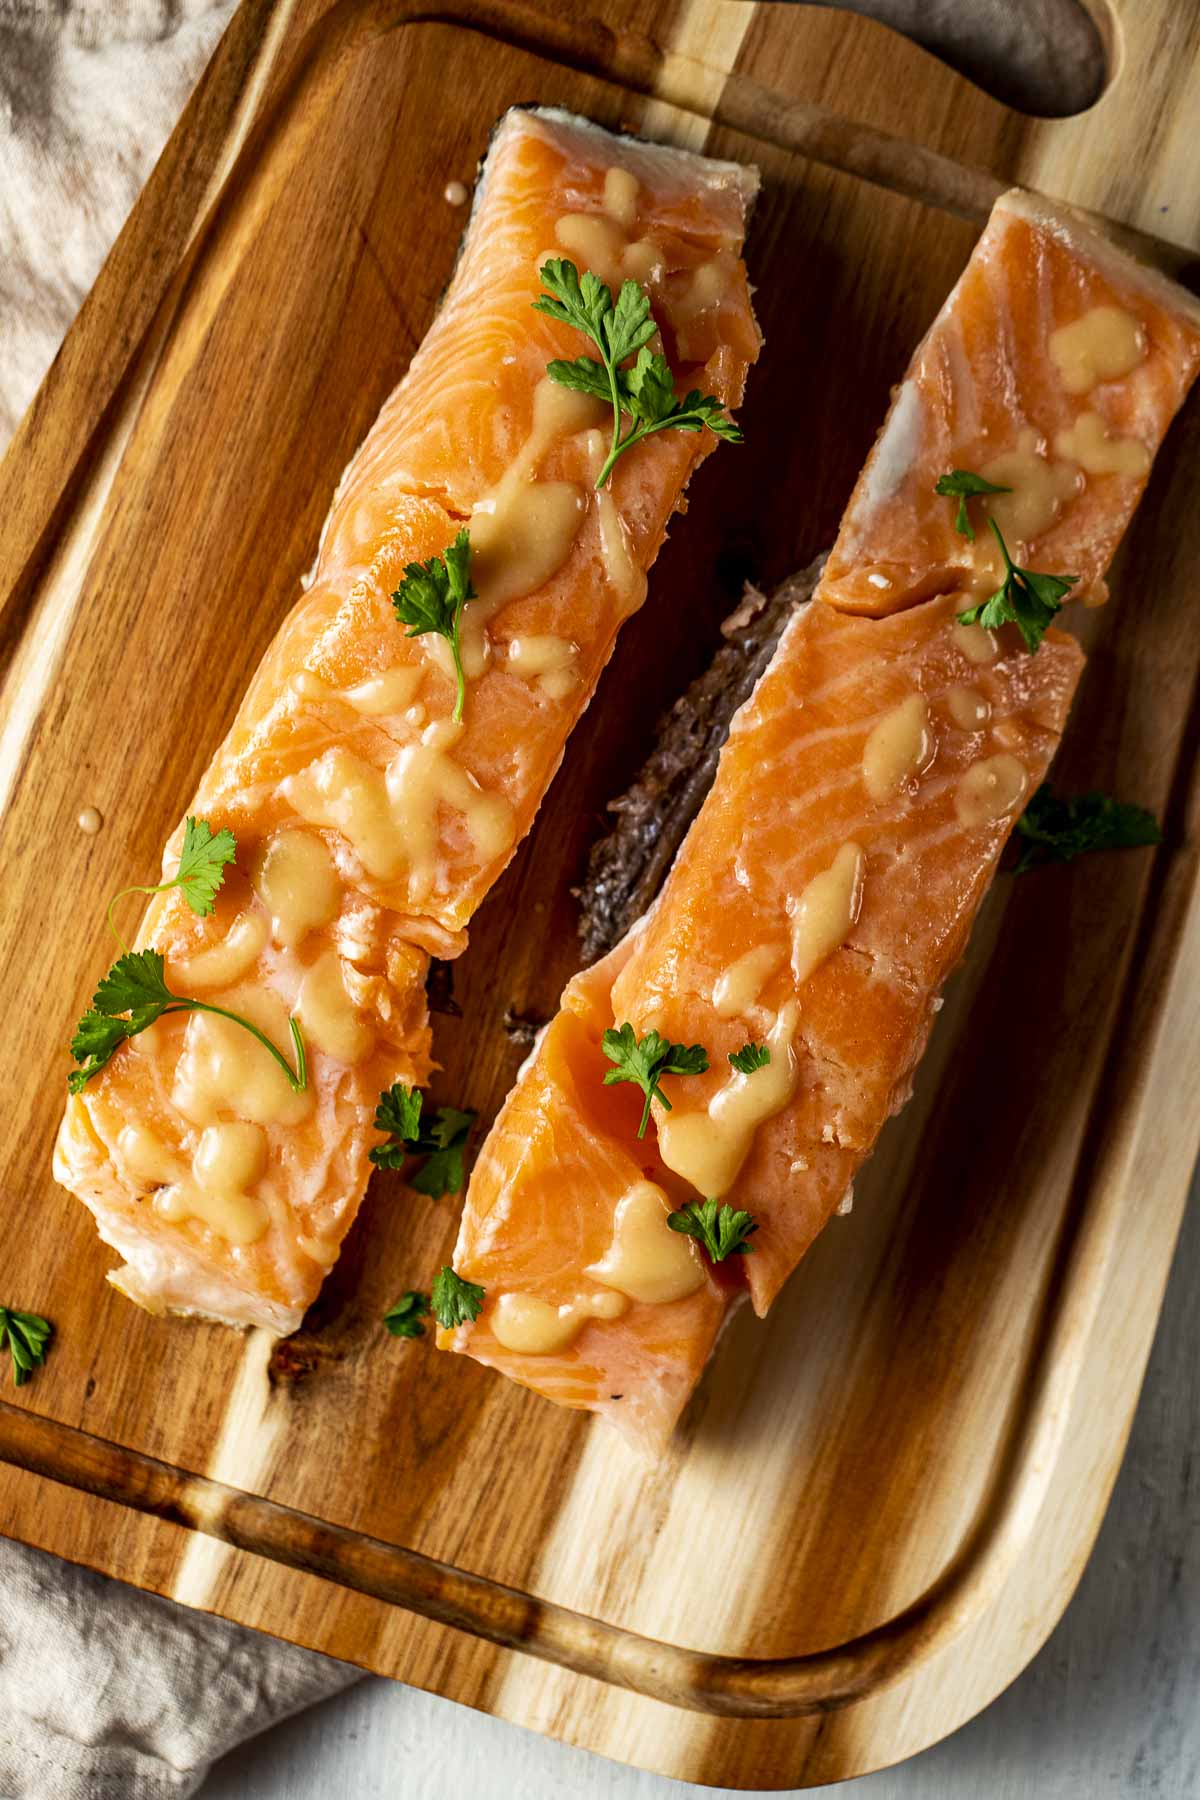 Overhead view of two salmon portions on a wooden board and topped with pineapple miso glaze.